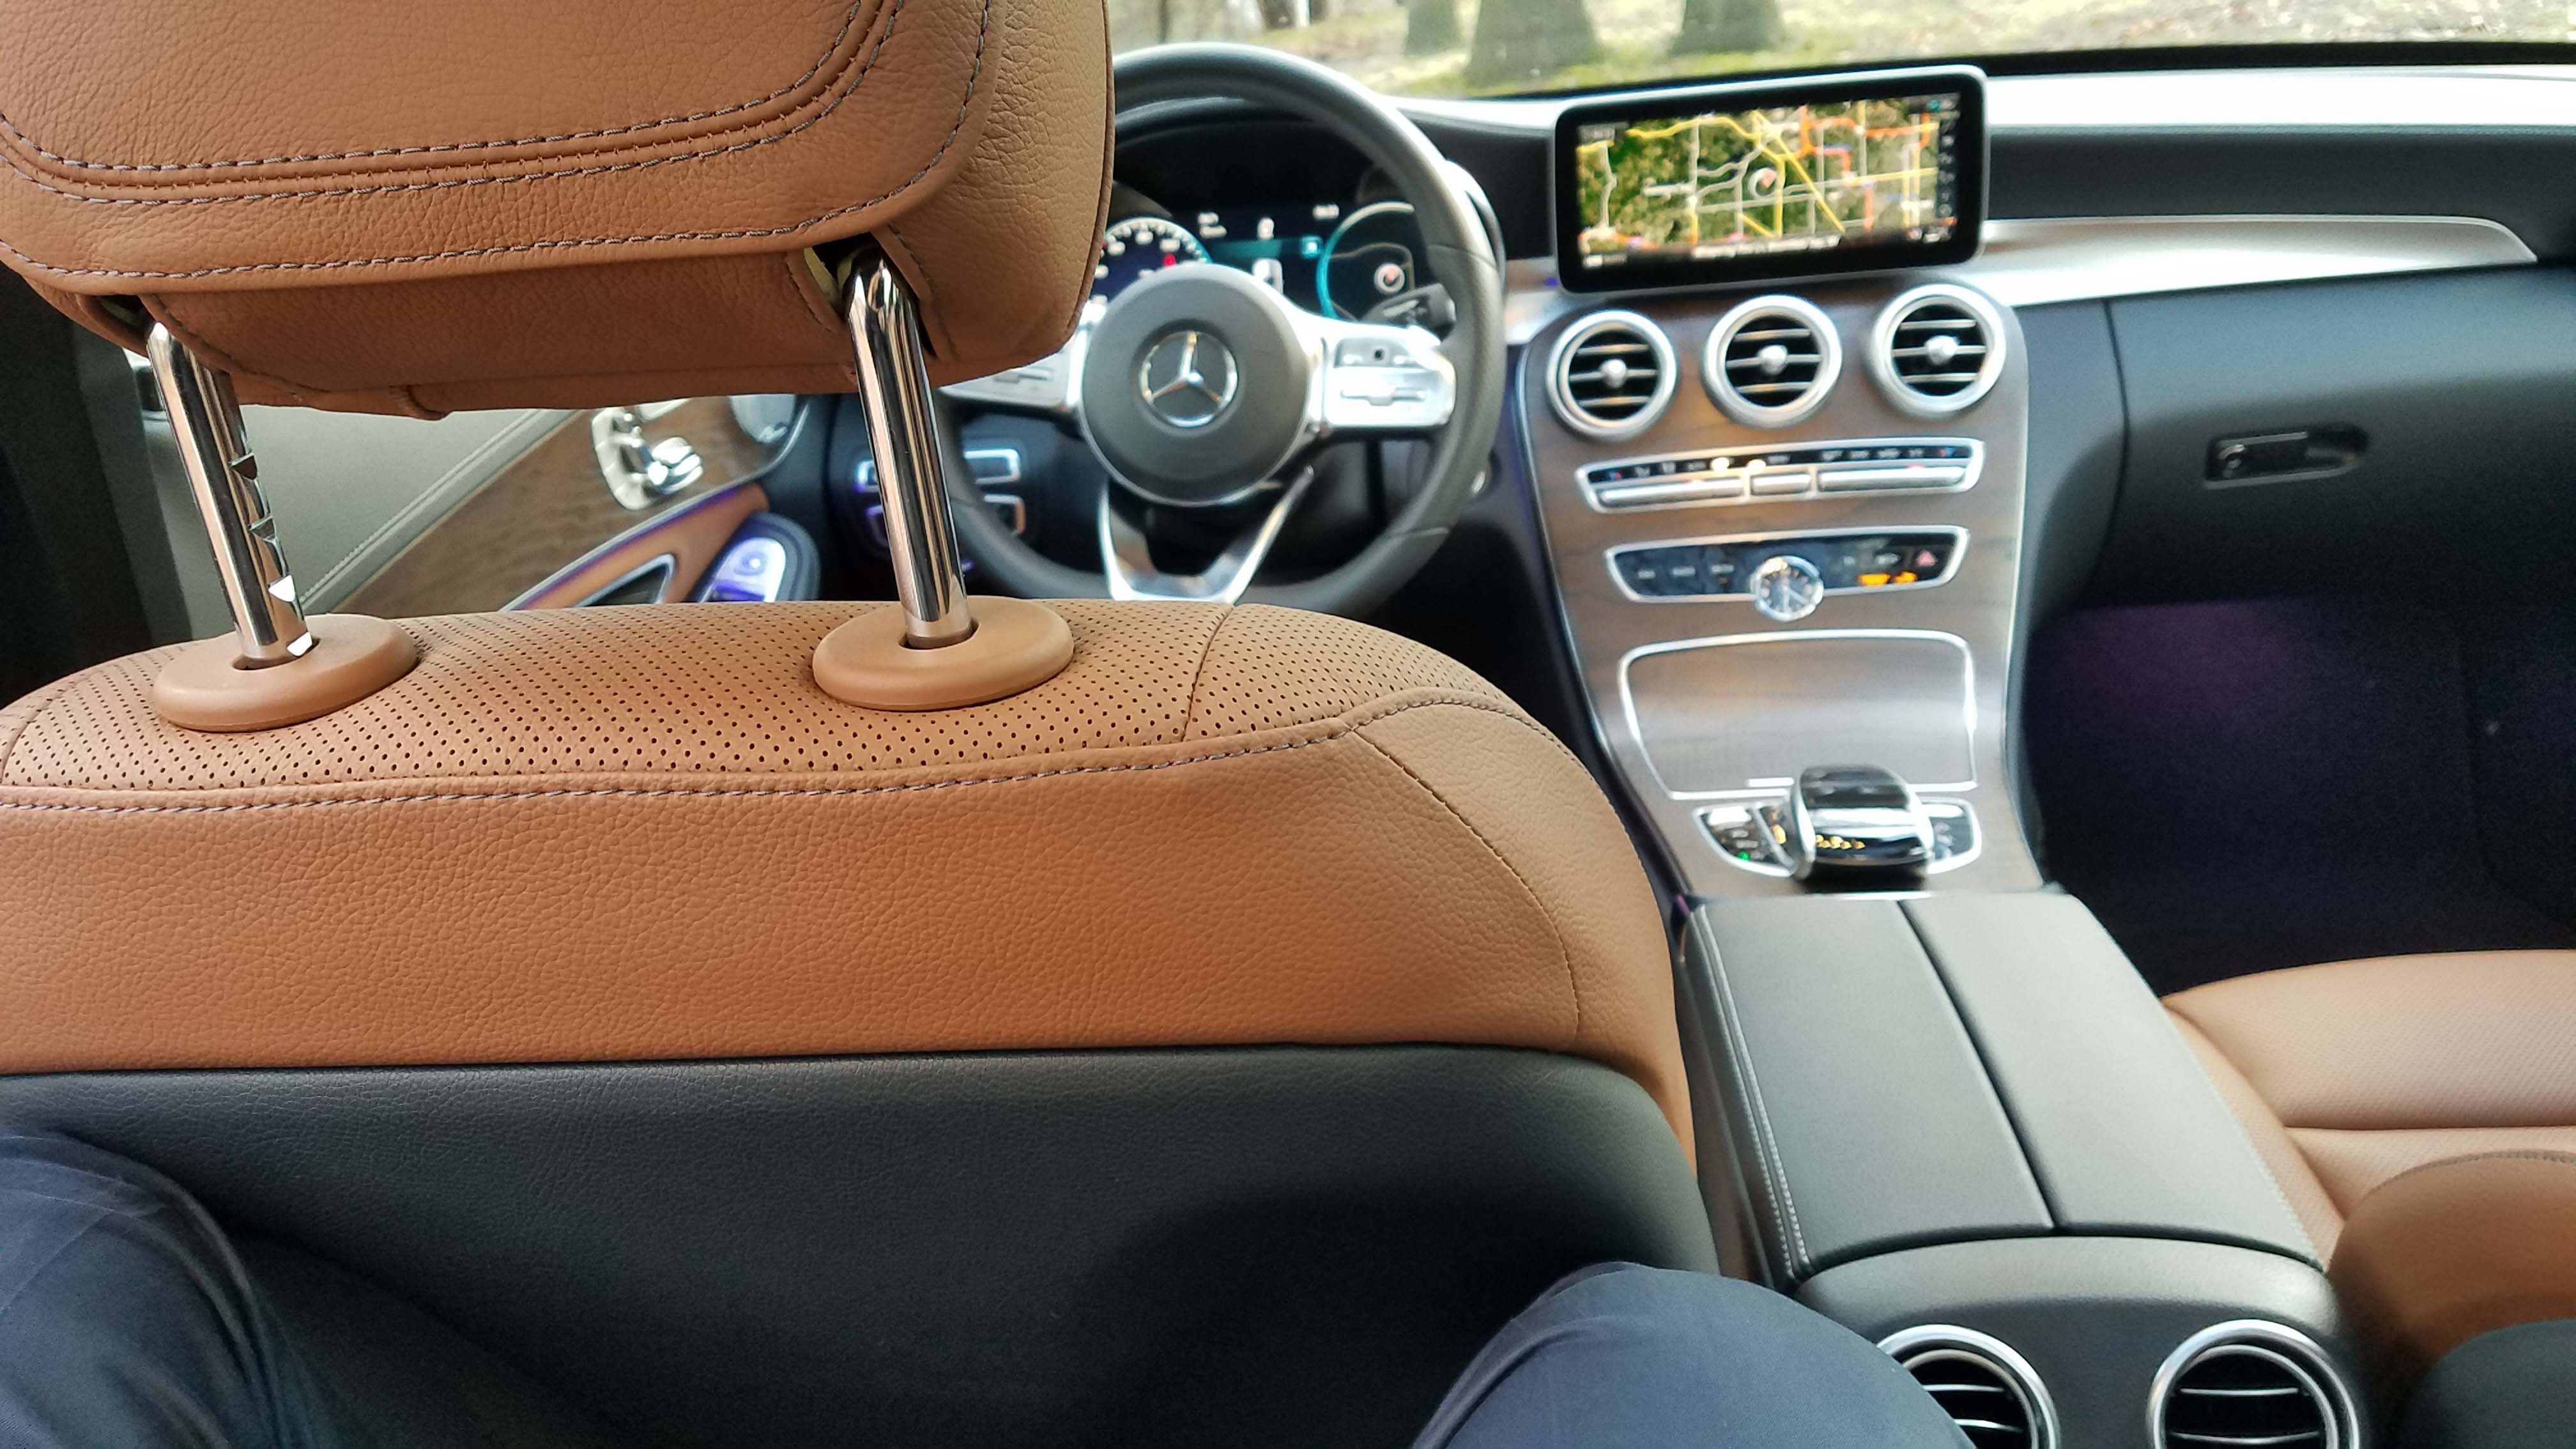 The 2019 Mercedes C300 has 35.2 inches of rear legroom — enough to fit a 6-footer comfortably.